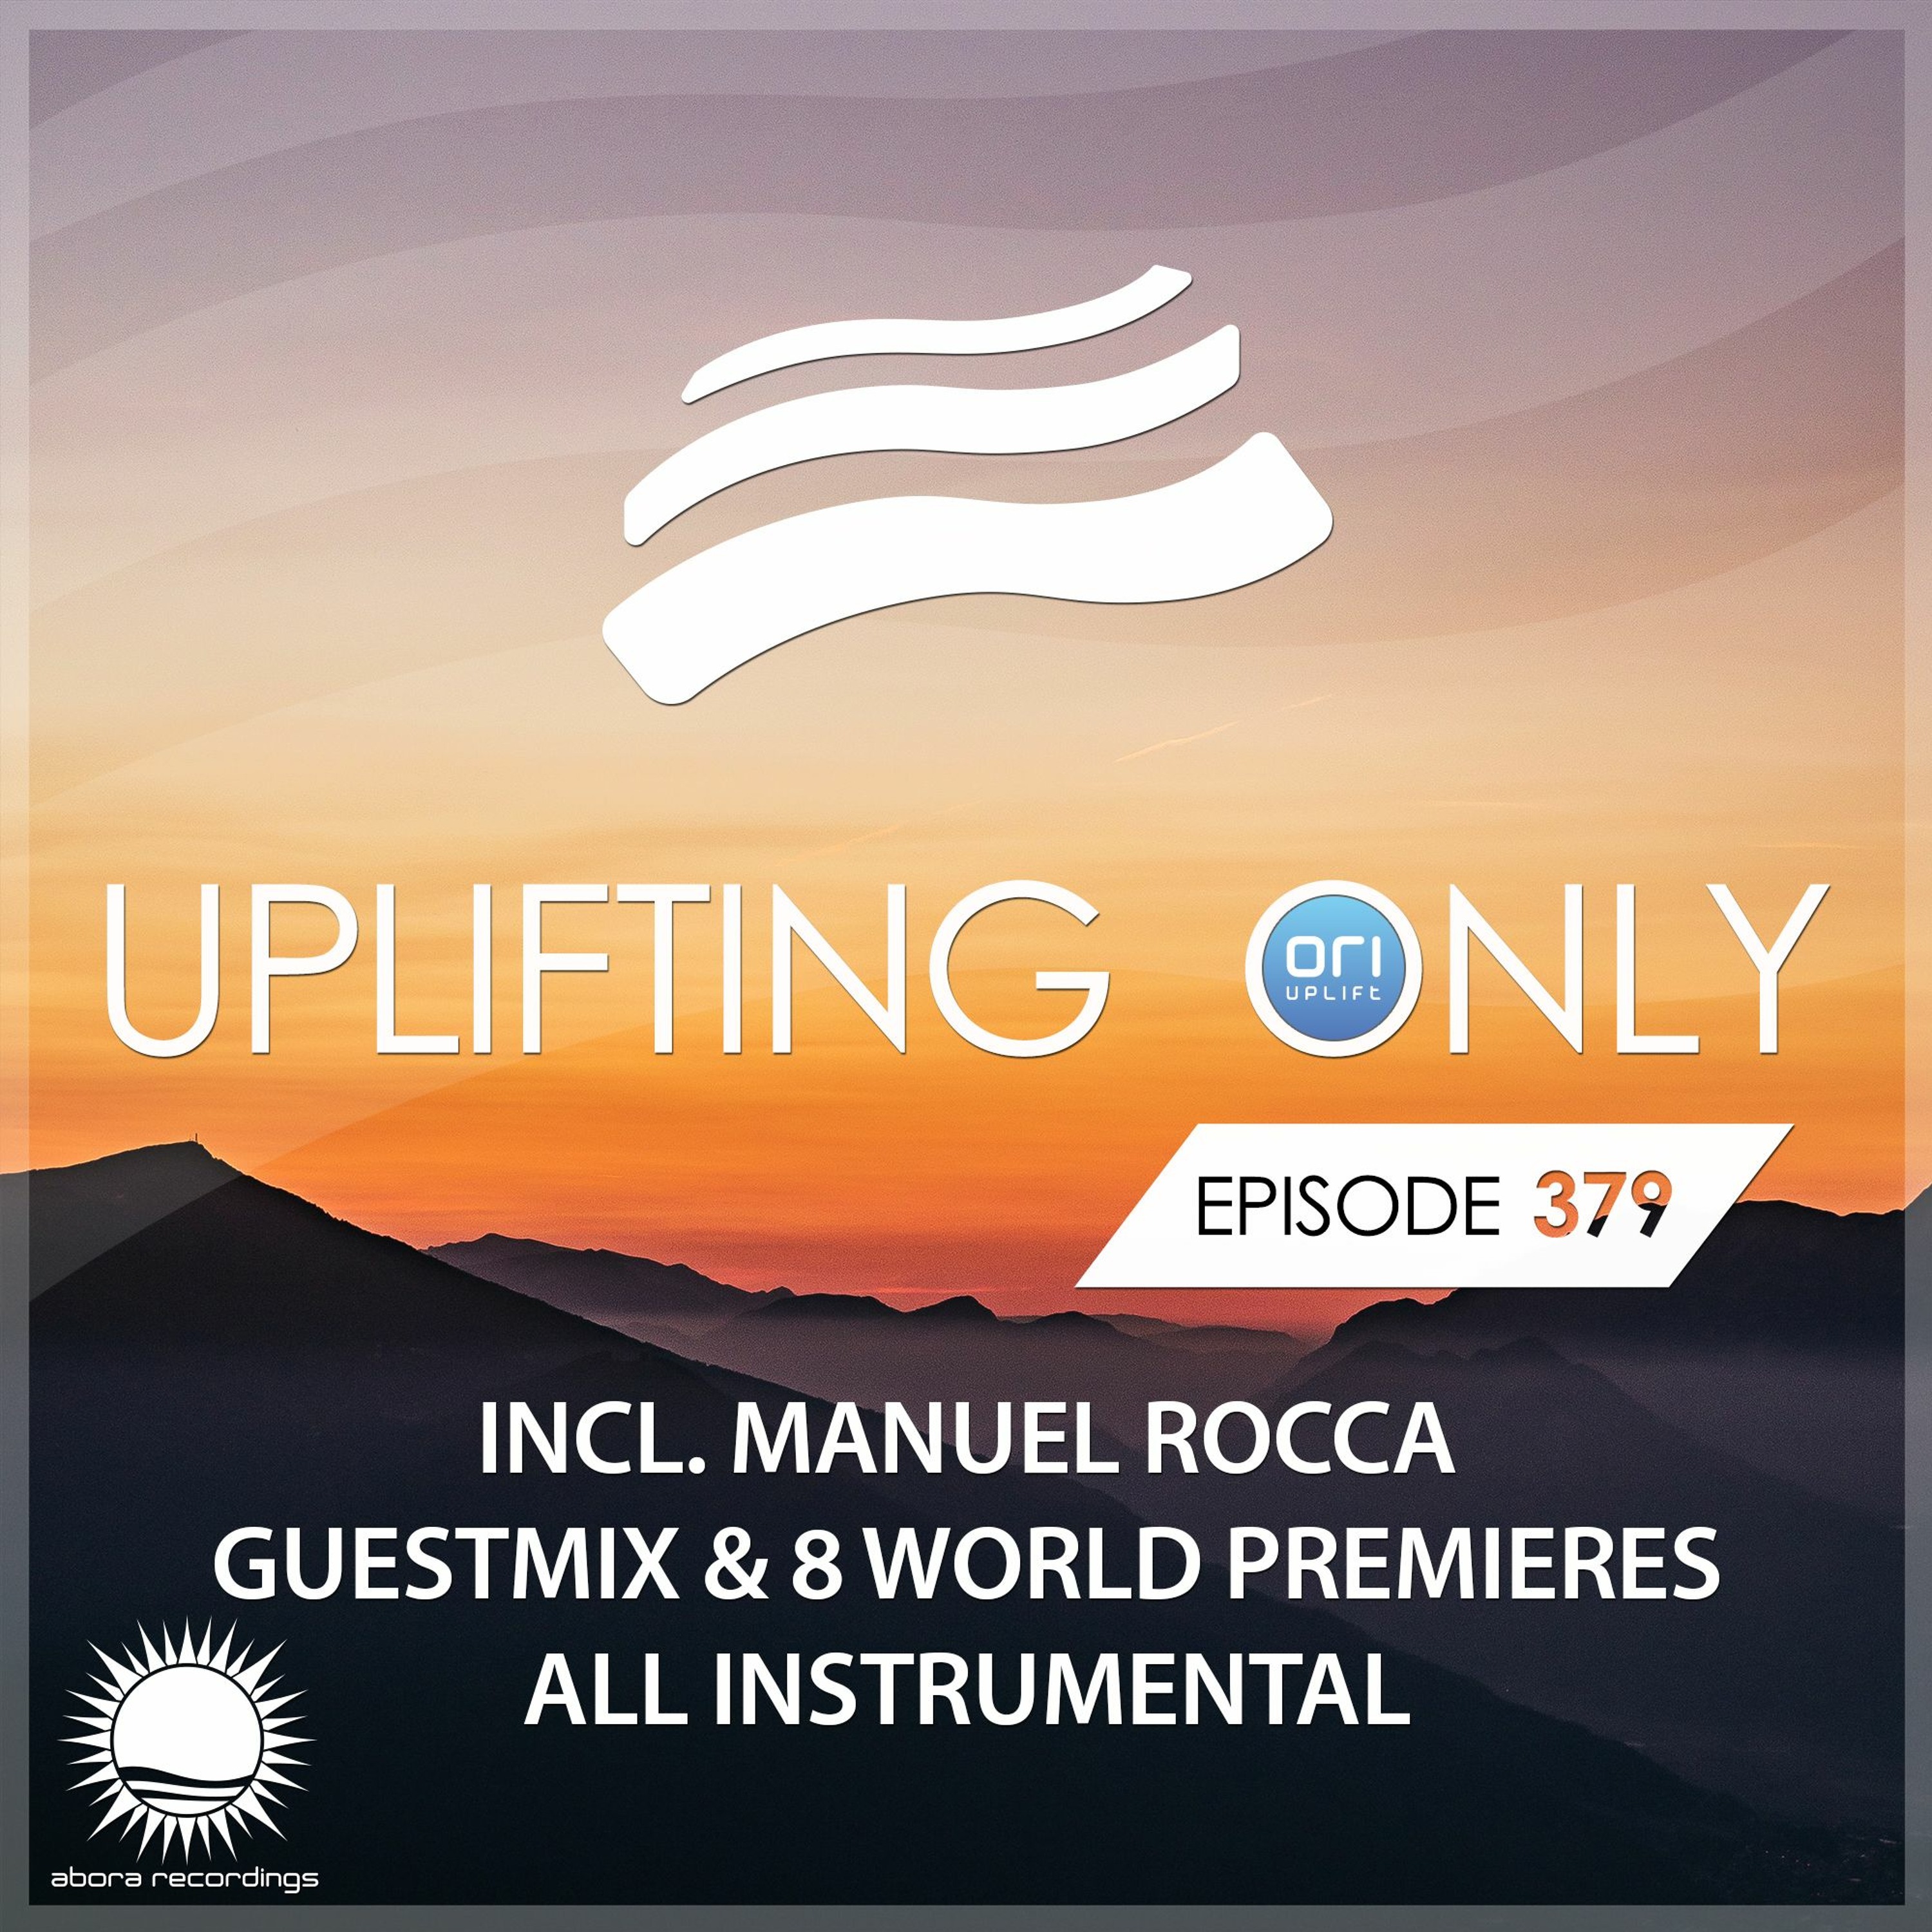 Uplifting Only 379 (May 14, 2020) (incl. Manuel Rocca Guestmix) [incl. Vocal Trance]